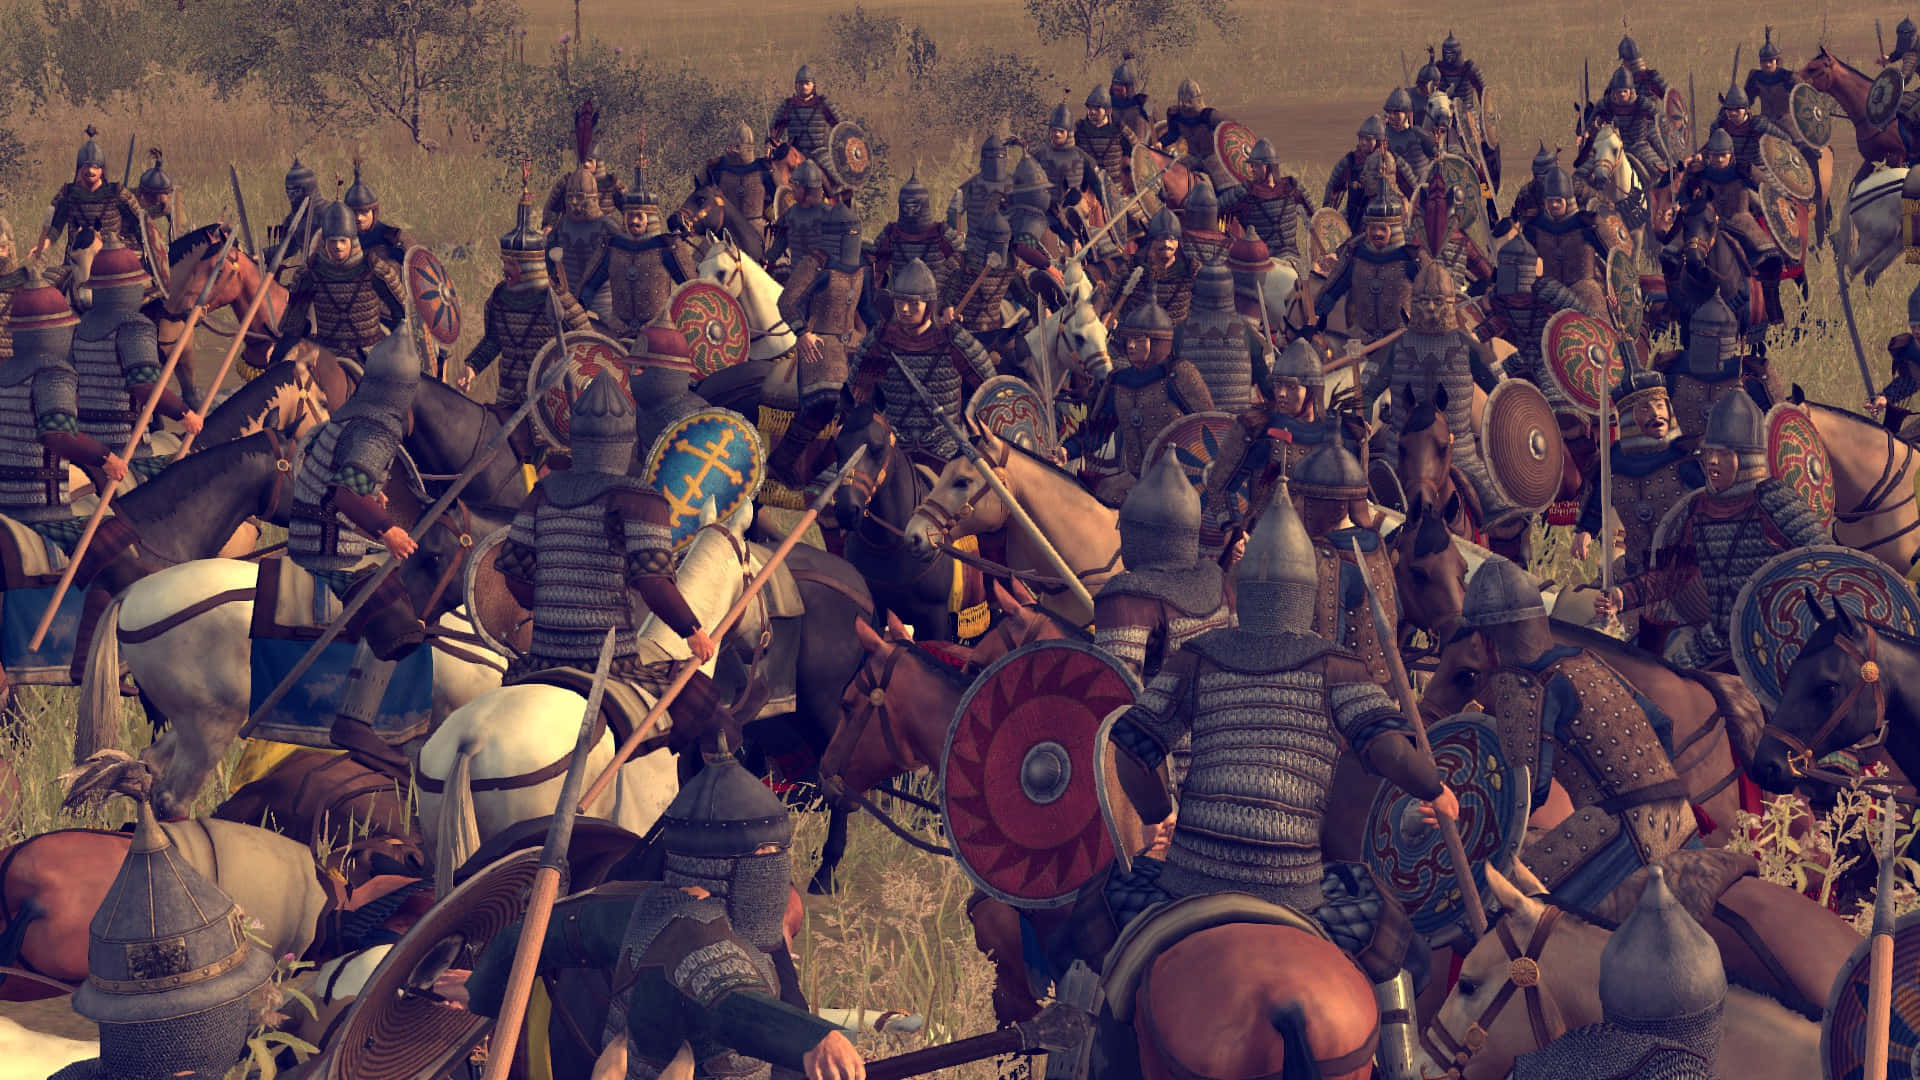 "The Epic Battle of Rome II"